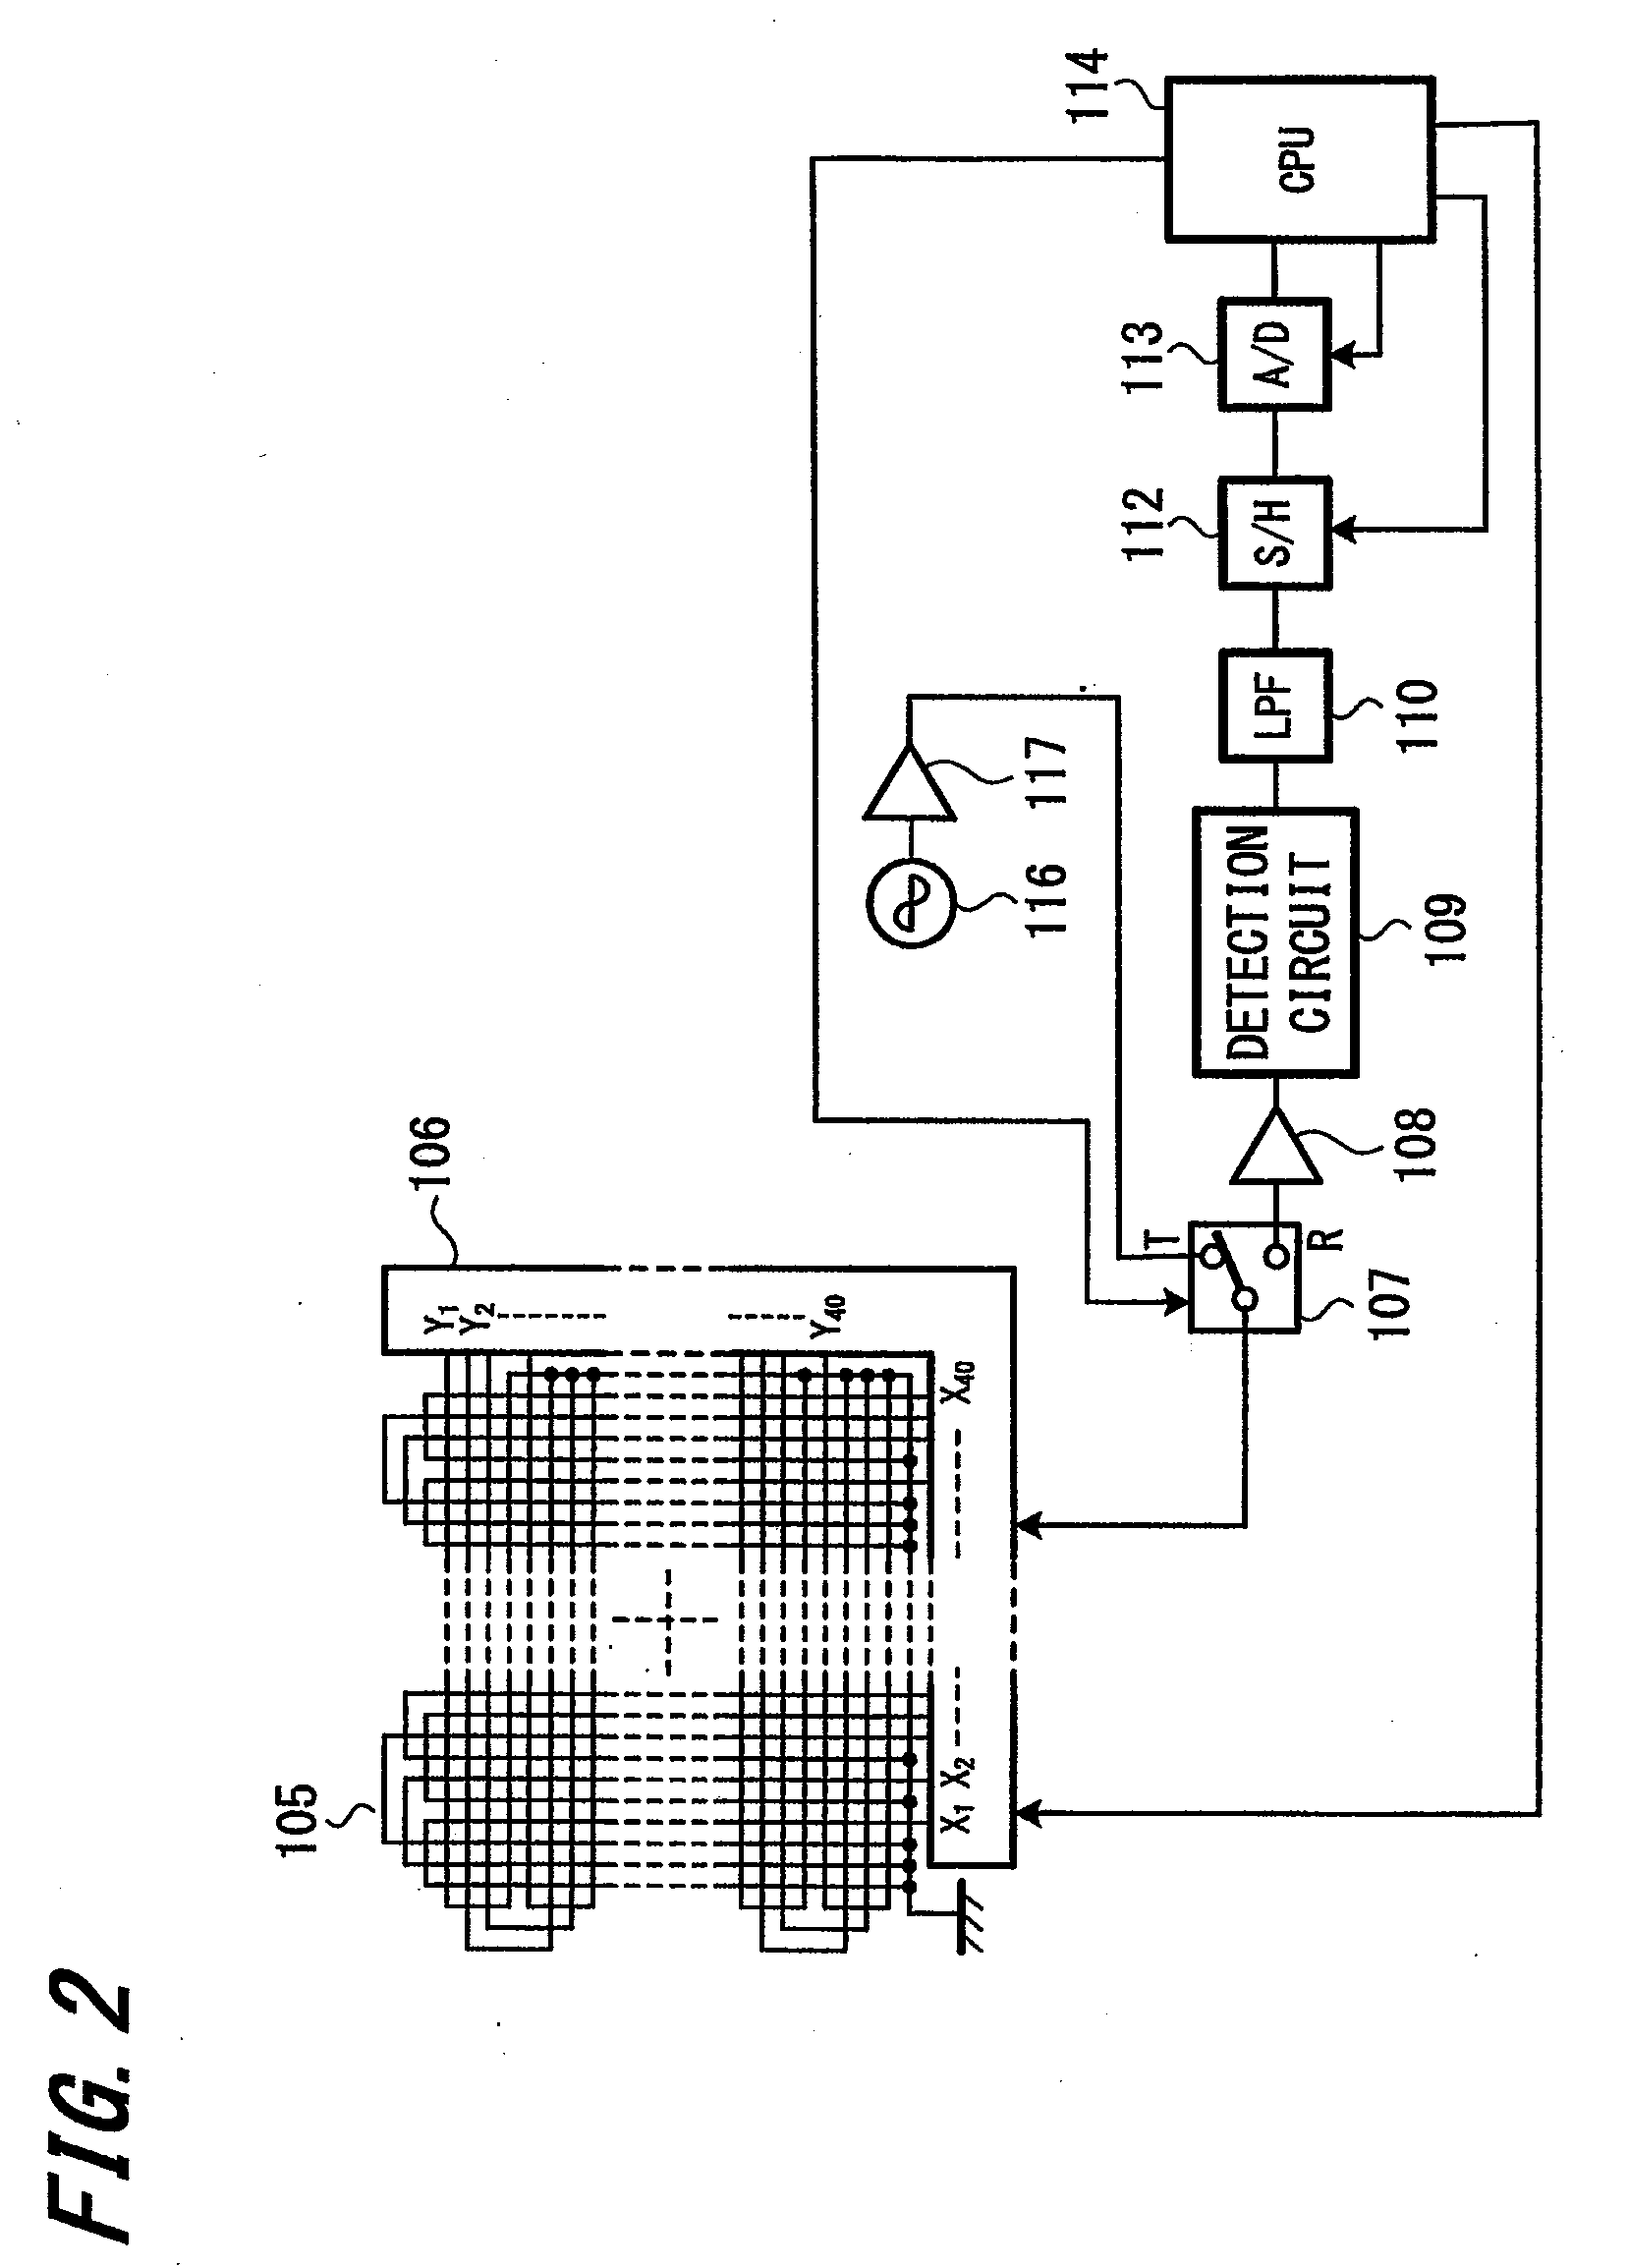 Digitizer and input device